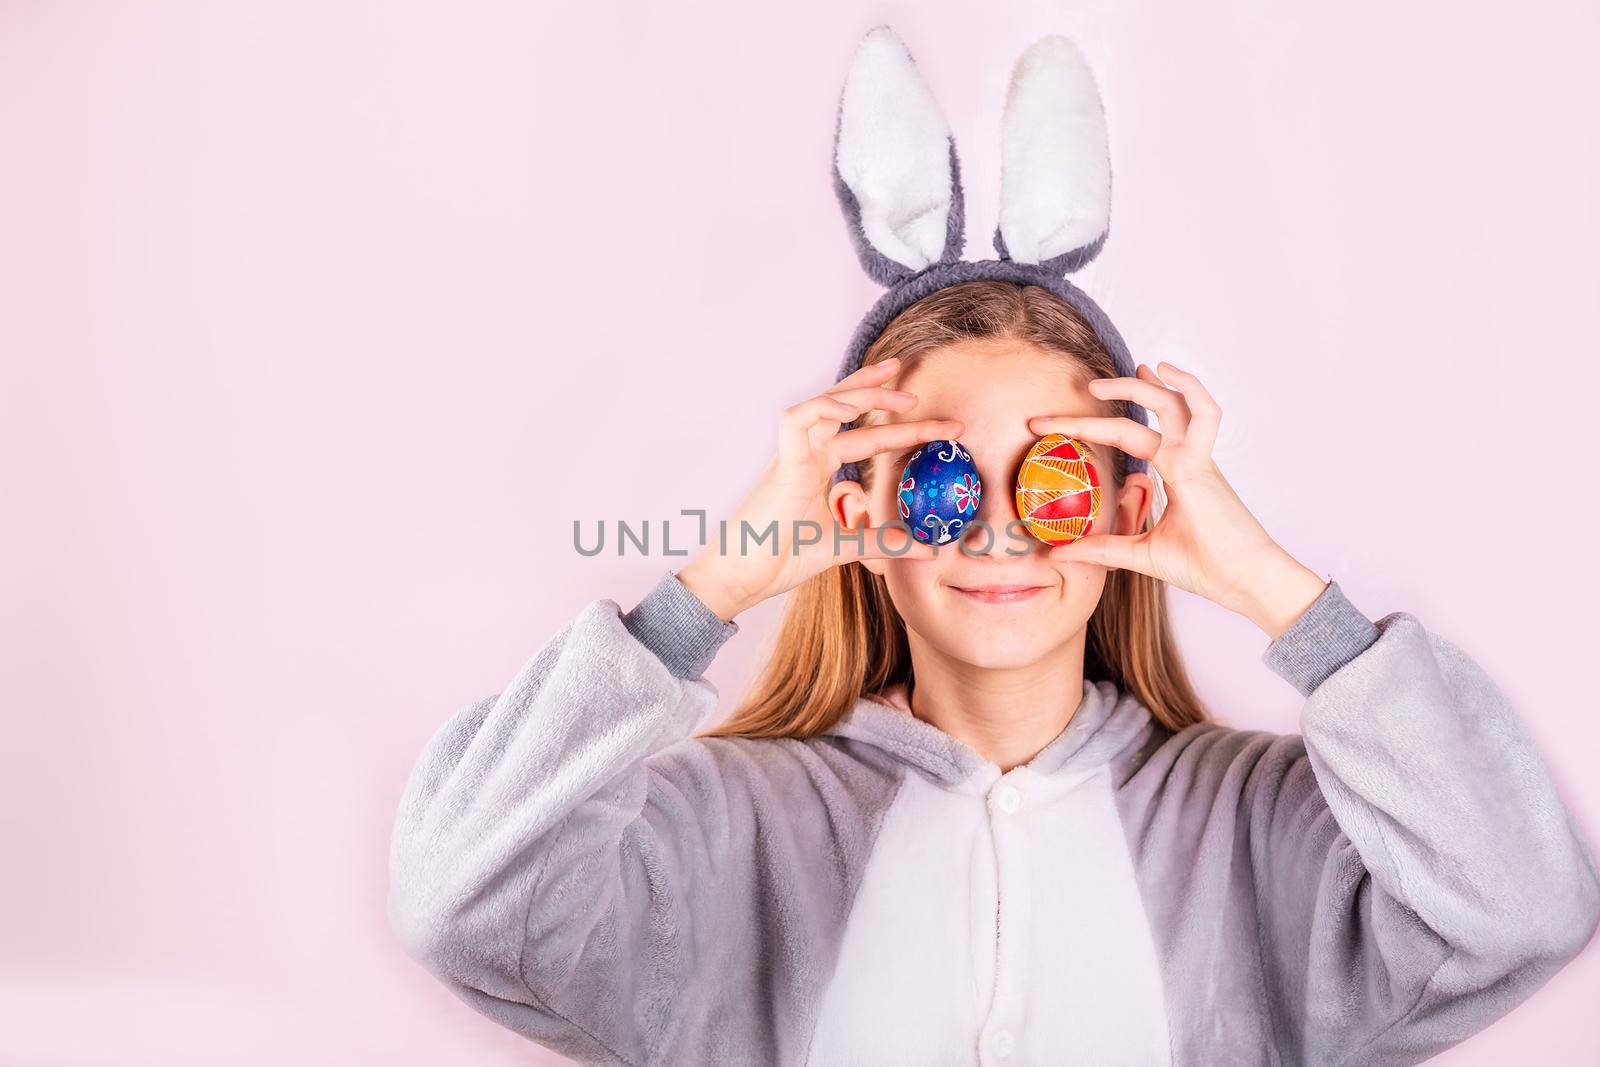 Girl in rabbit bunny ears on head with colored eggs on pink background. Cheerful smiling happy child. Easter holiday banner